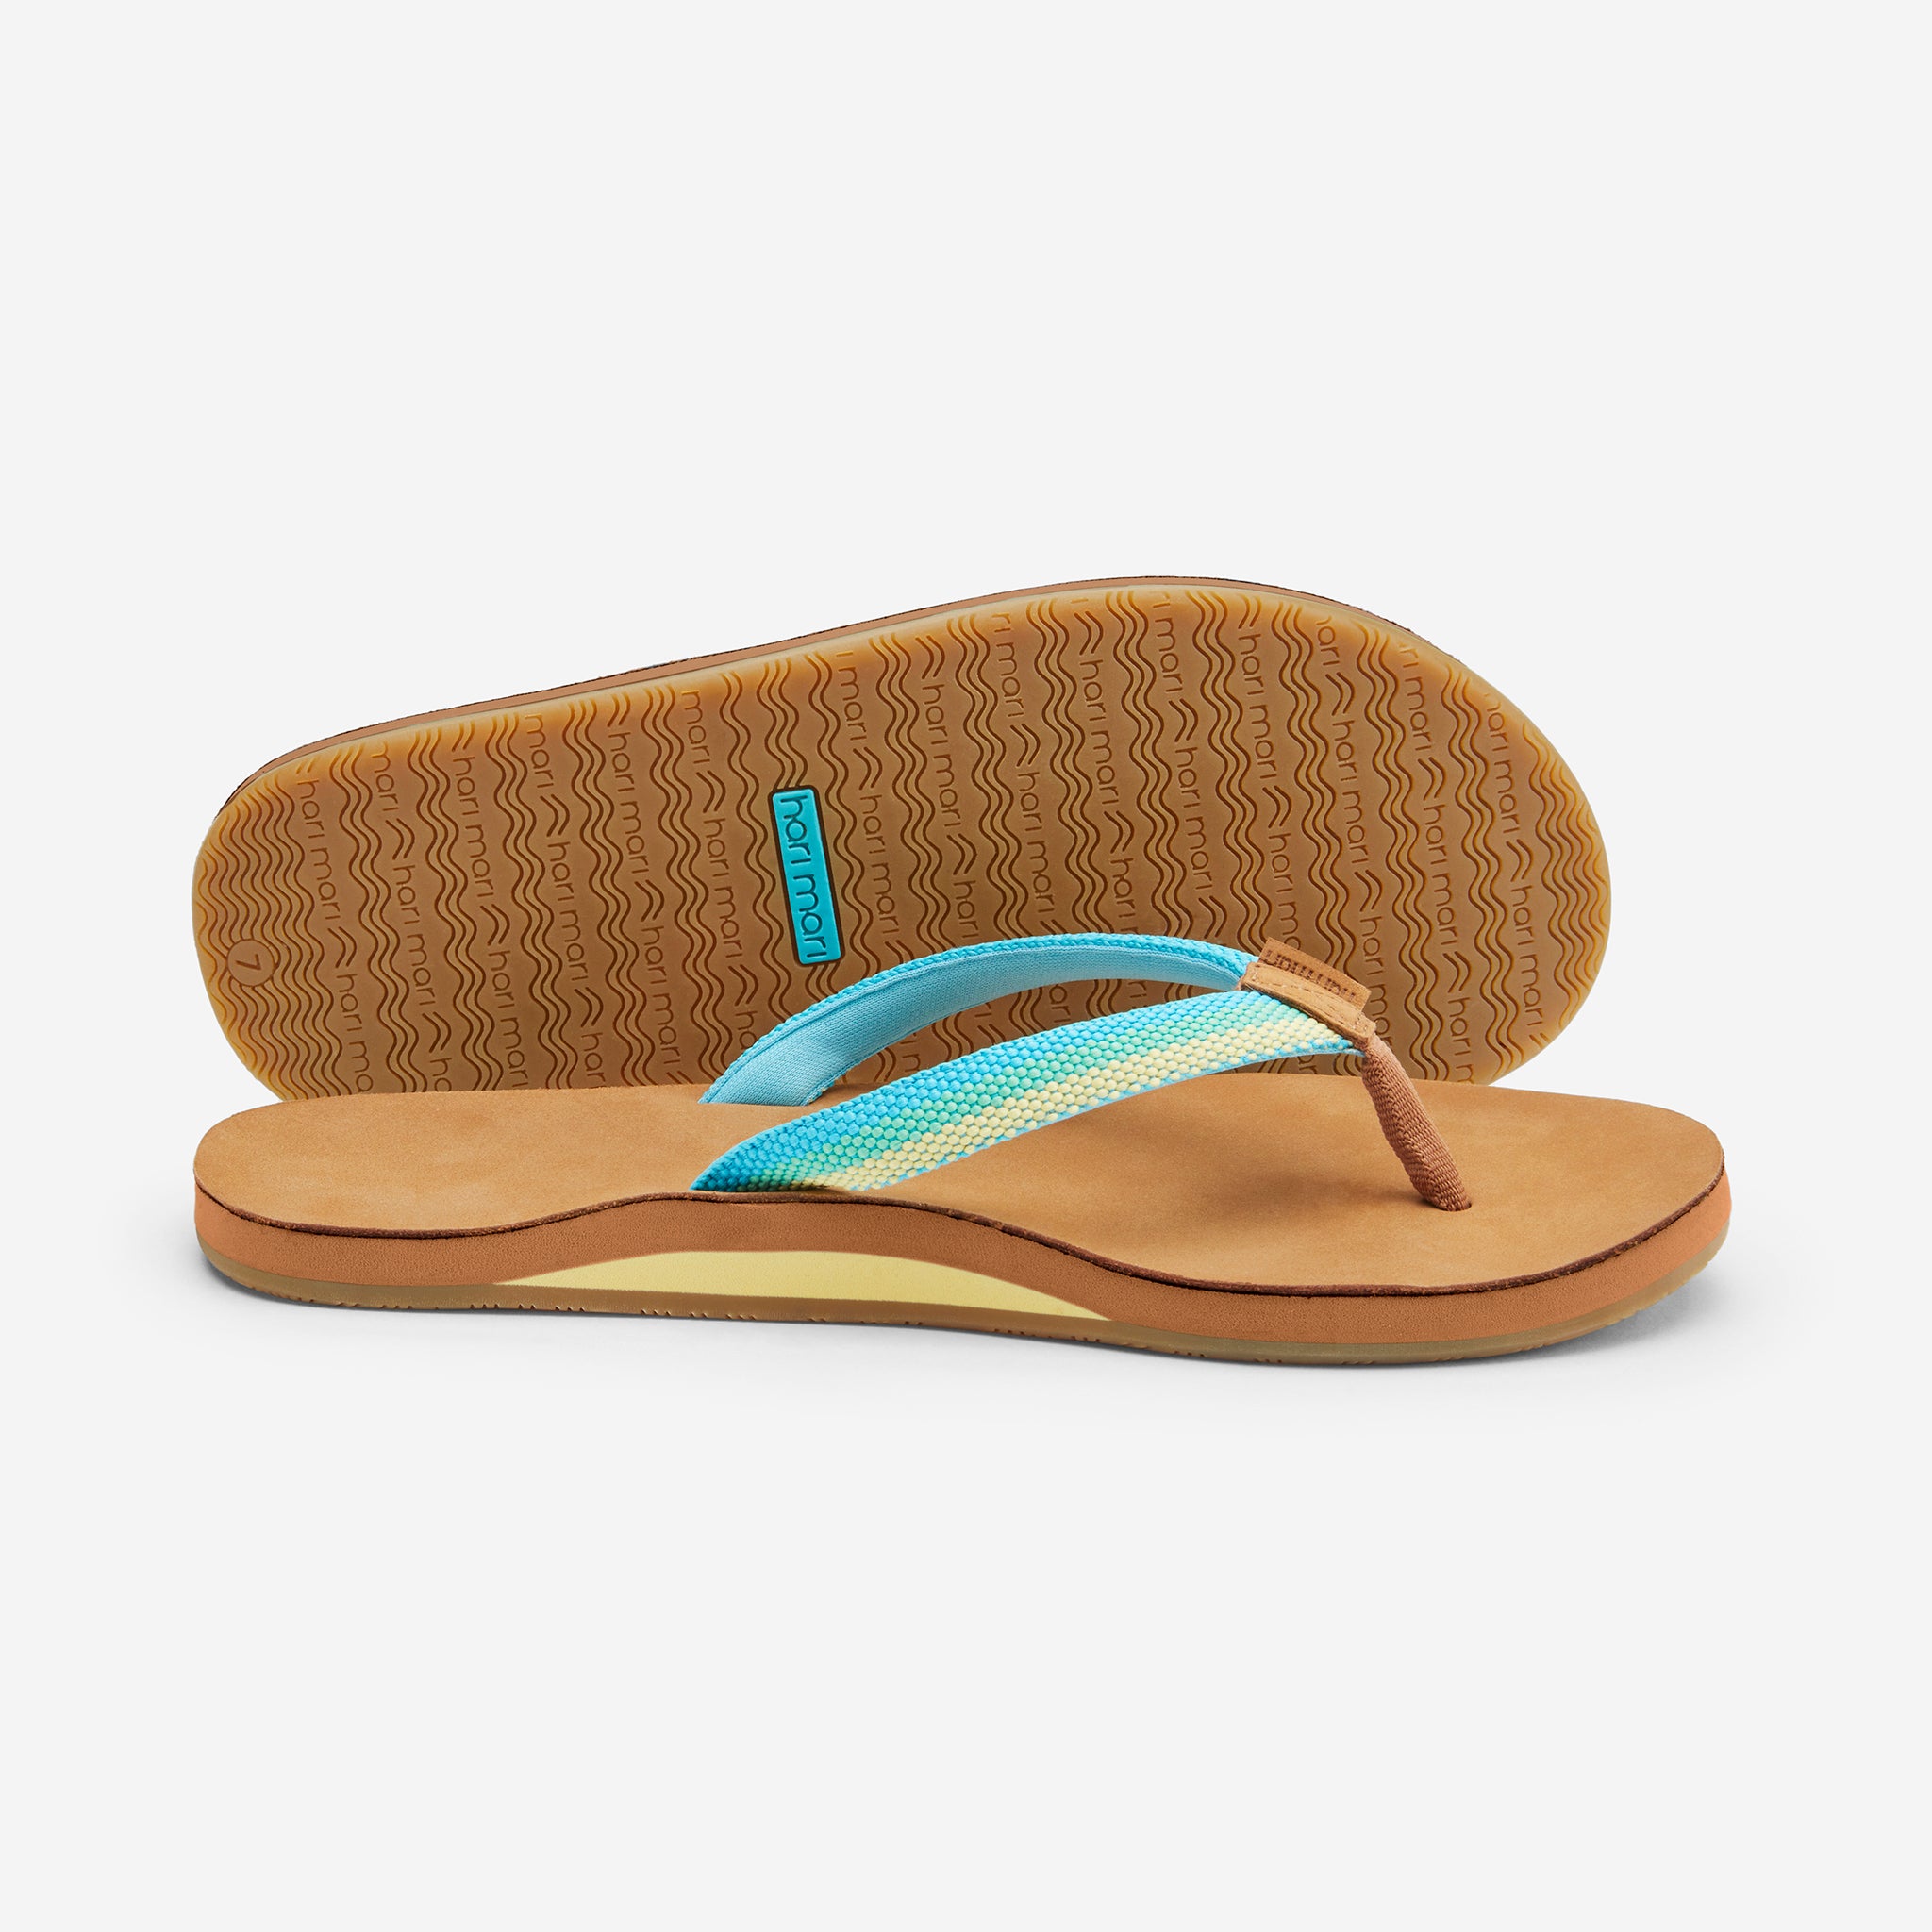 leather flip flop sandals from Hari Mari with blue green and yellow stripe on strap